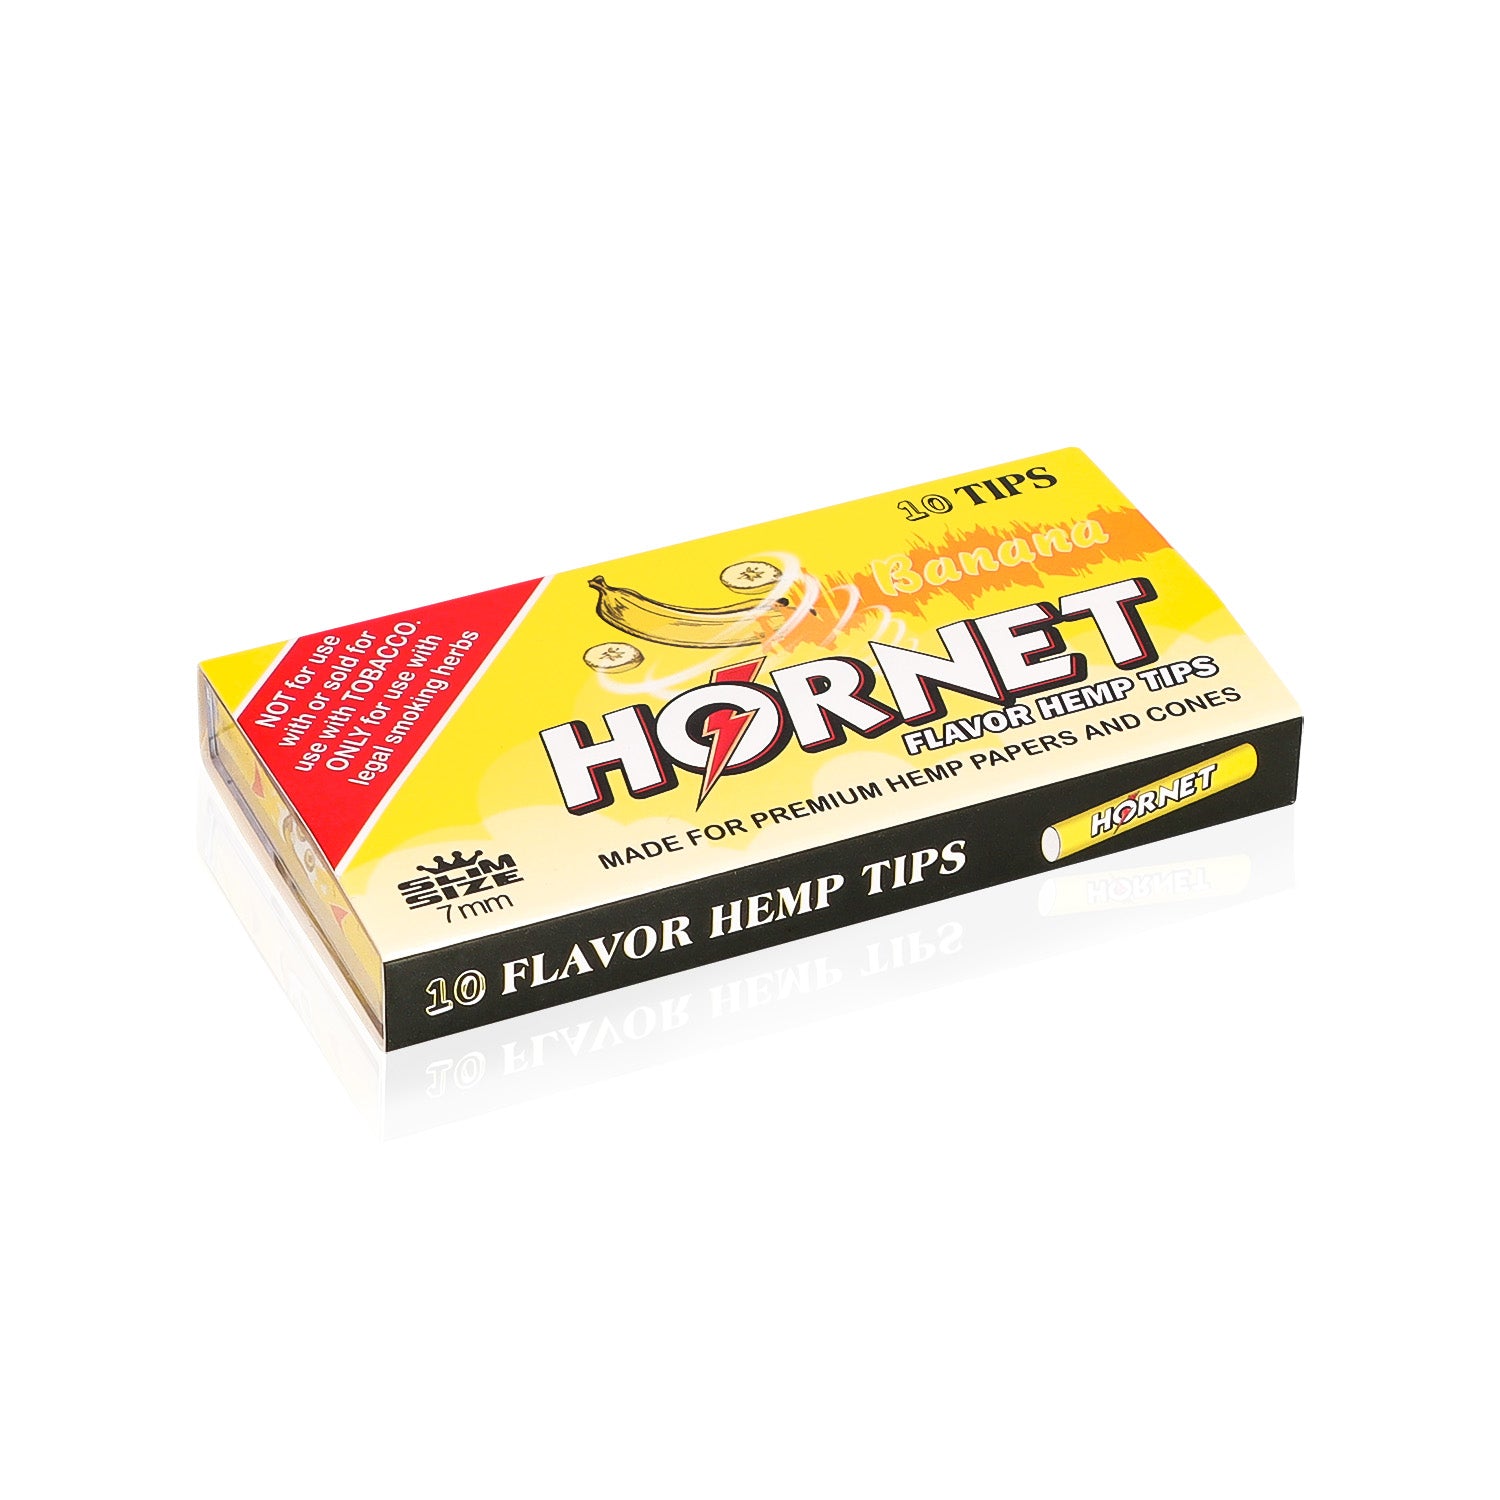 Hornet Banana Flavors Filter Tips with Flavored Pop, 7 mm Filter Tips, 10 Tips / Pack 24 Packs / Box